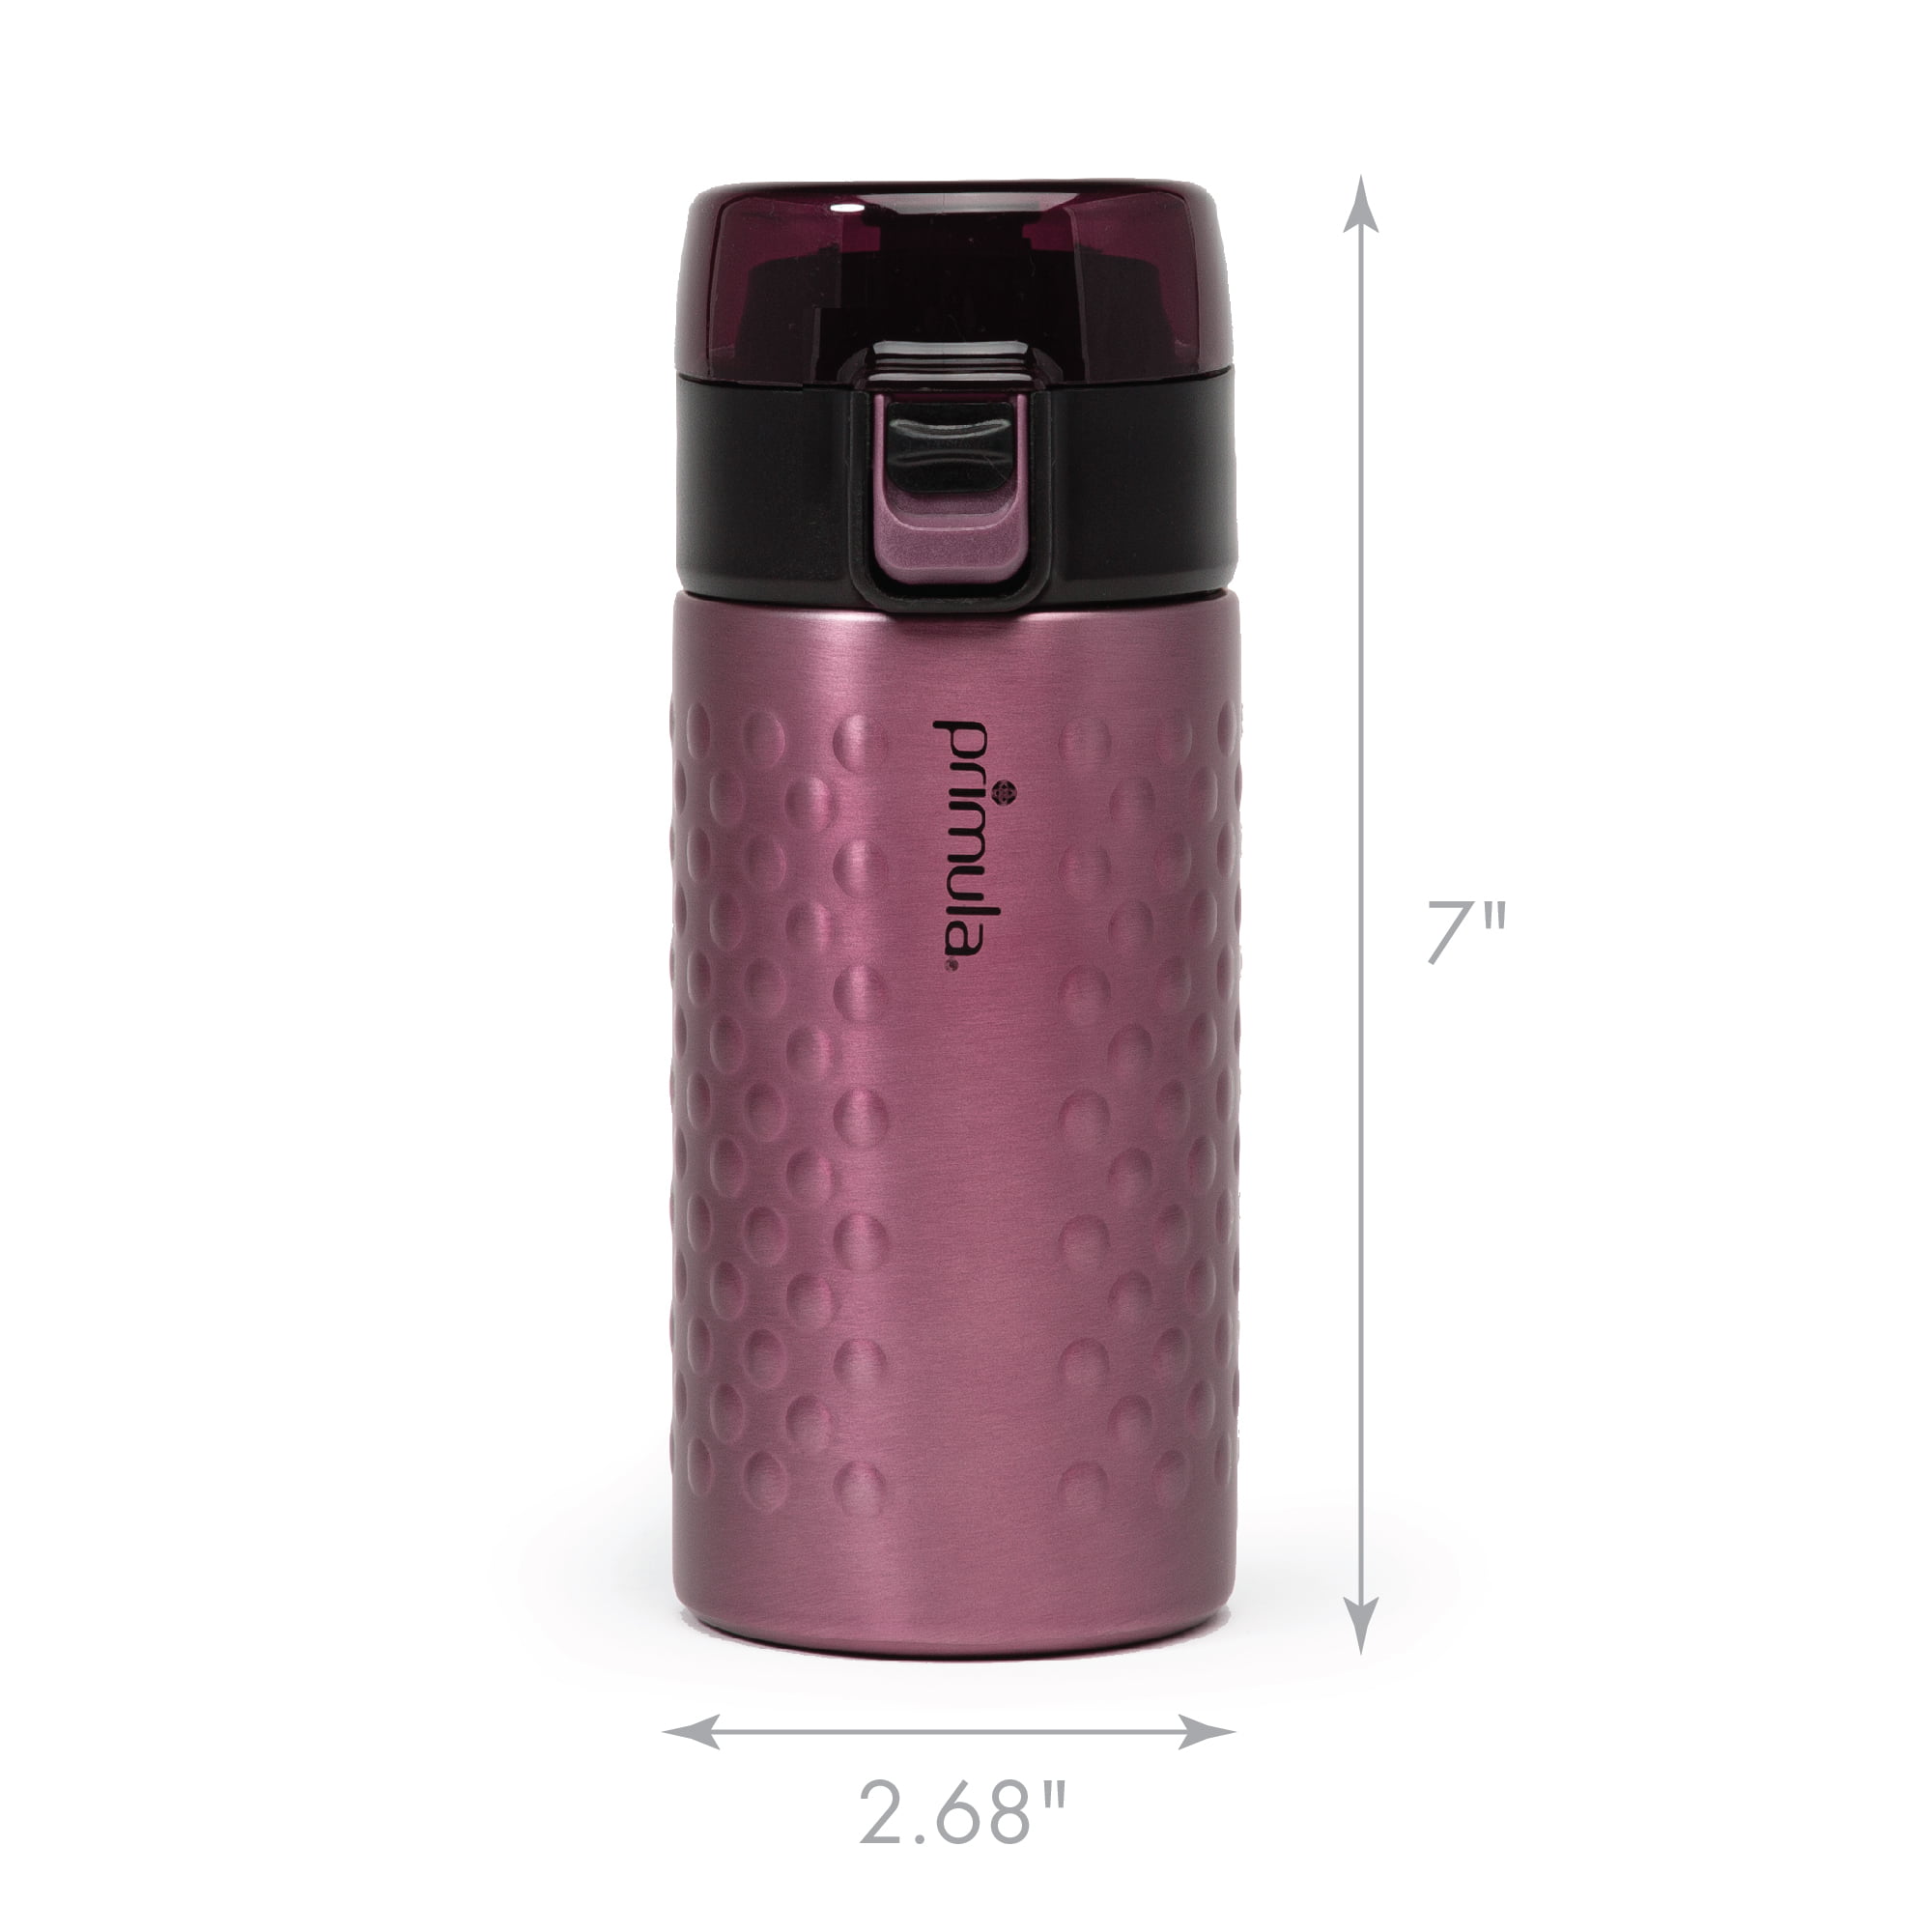  Primula Silhouette Water Bottle, 17 oz, Iridescent Pink :  Sports & Outdoors